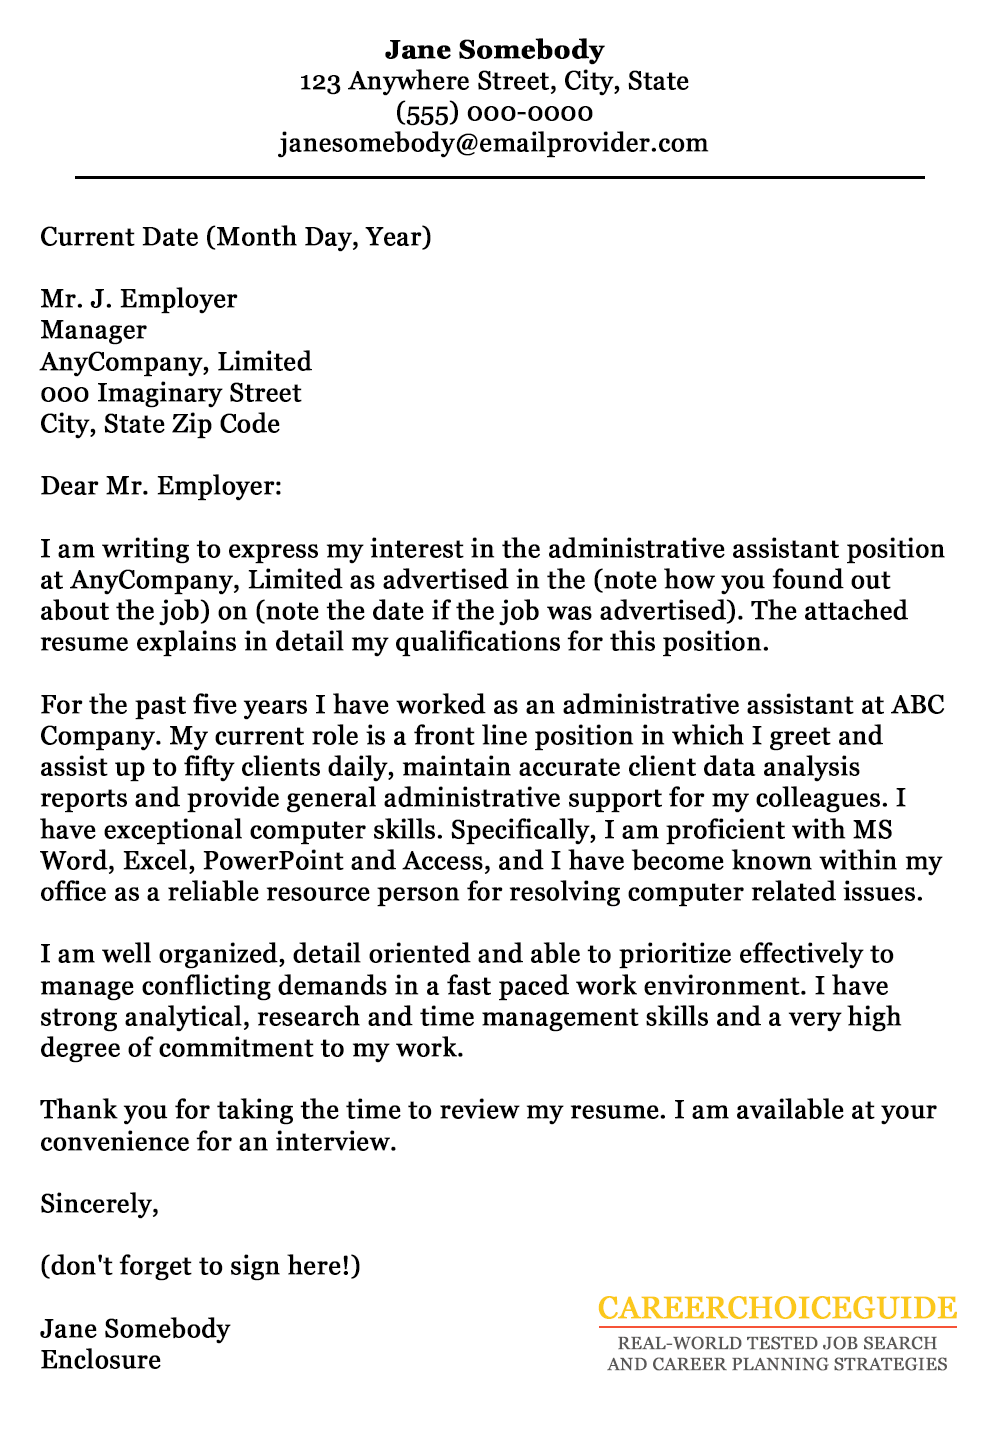 Sample Admin Assistant Cover Letter from www.careerchoiceguide.com